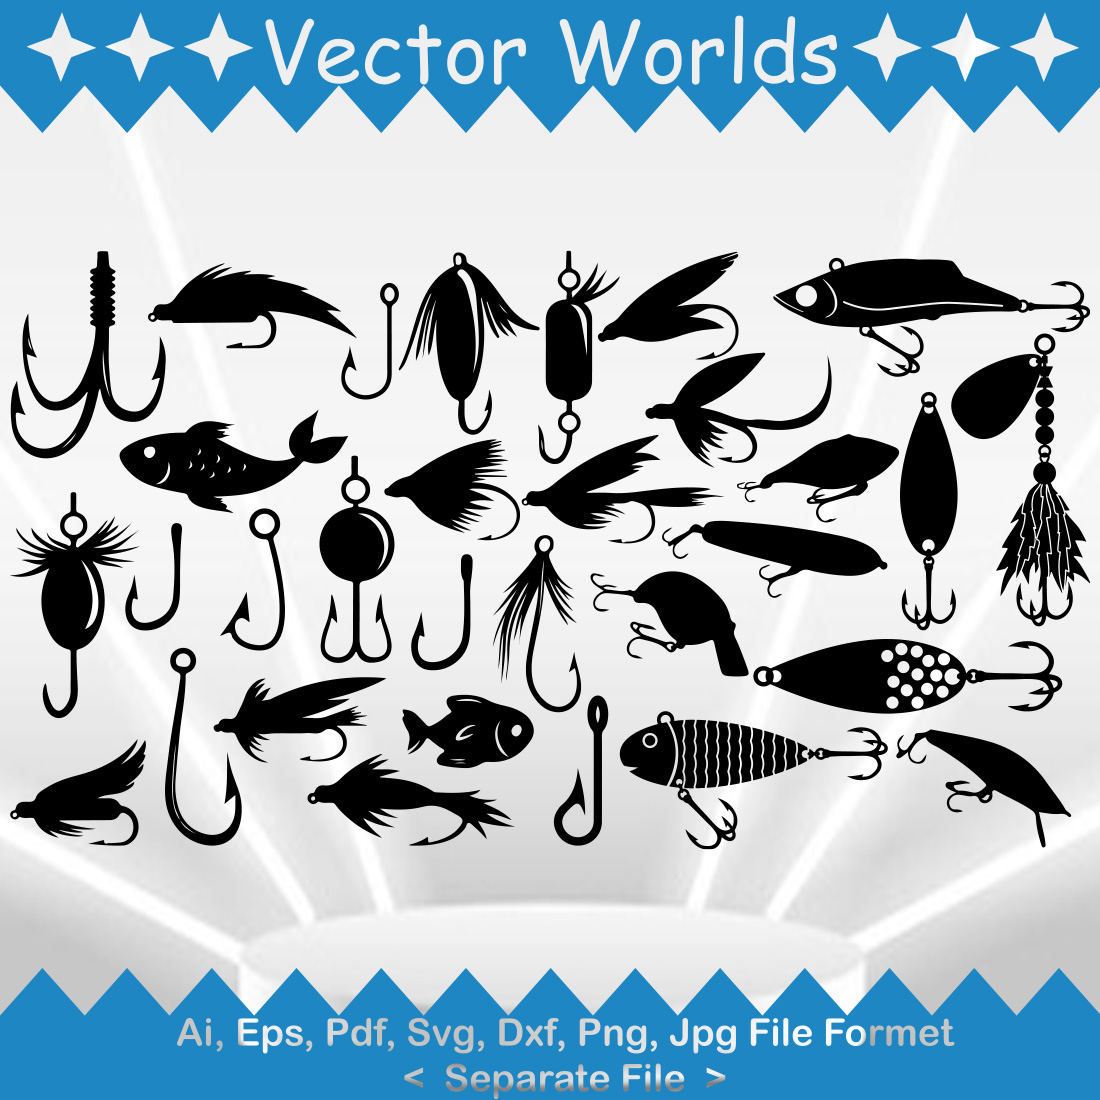 Fishing Lure SVG Vector Design cover image.